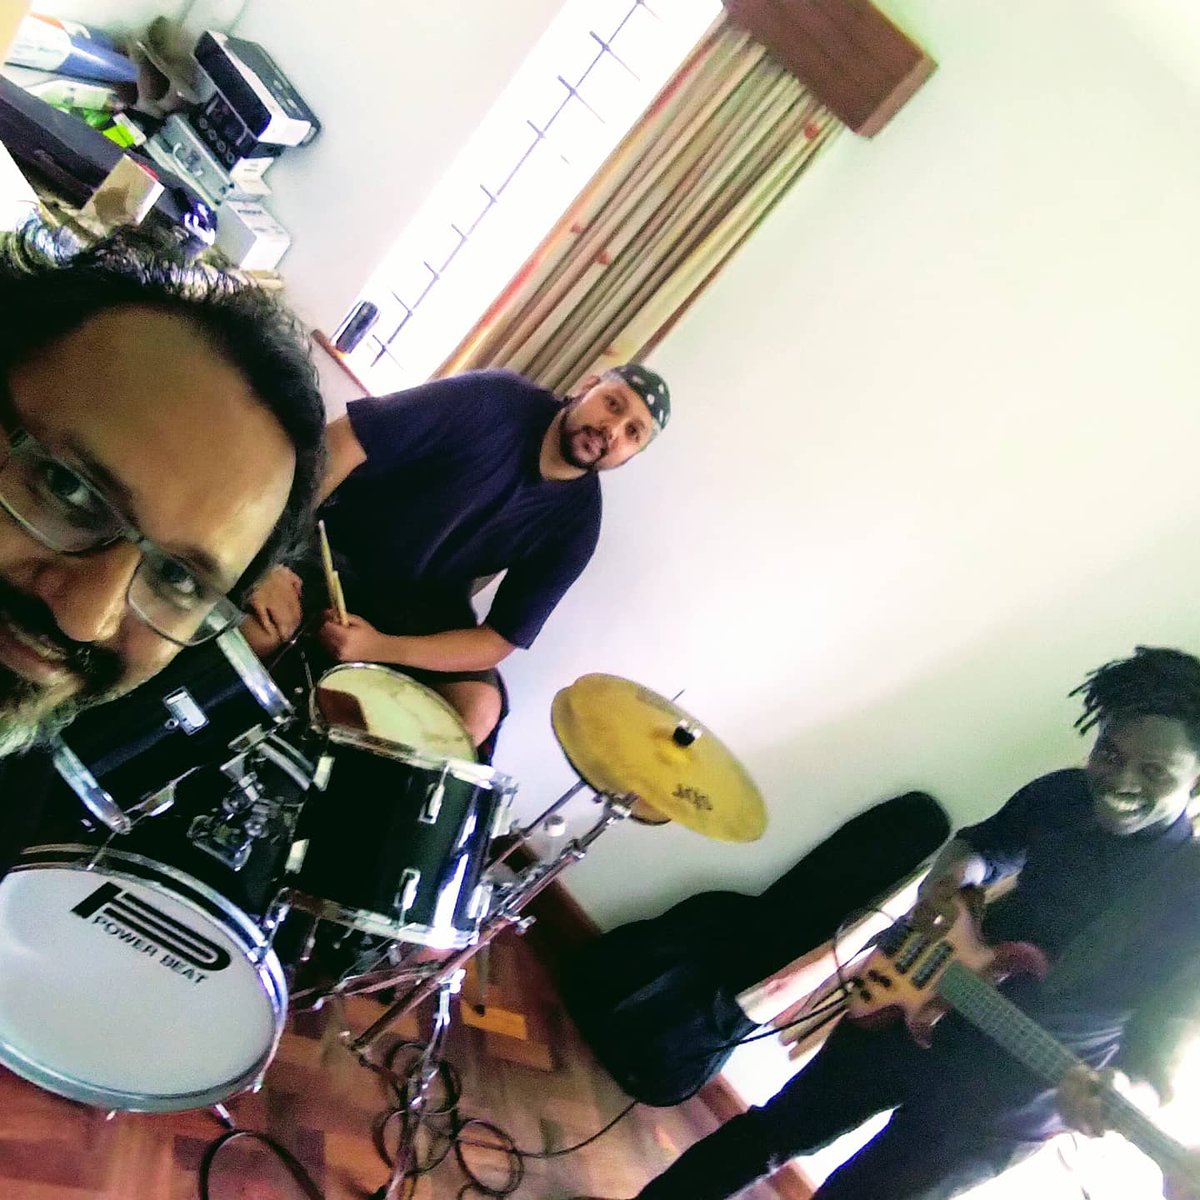 Full jam after ages, totally hit the spot! Now working on new material, stay tuned. Social distancing observed, #tuendekazi

#slcrising #kenyanmetal #kenyanrock #nairobimusic #newnairobimusic #nairobiunderground #loveofrock #loveofmetal #rockforever #rockfever #metalfever #rock